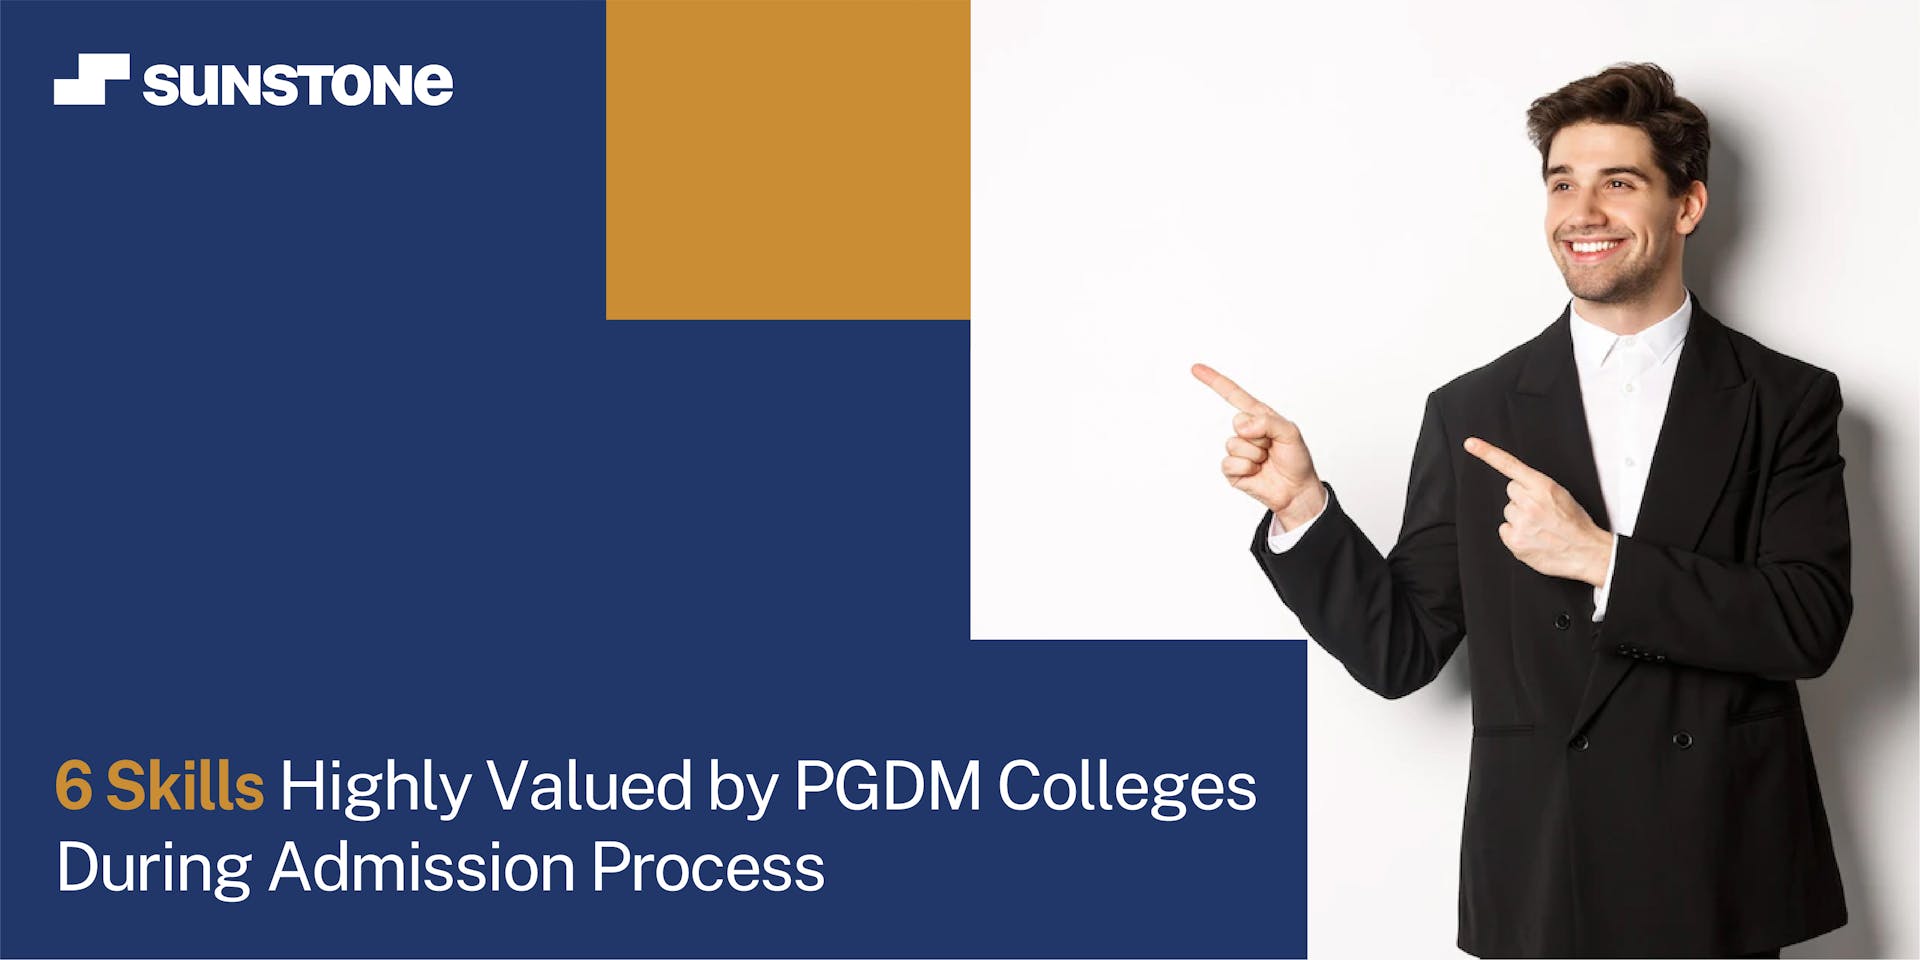 6 Skills Required for PGDM During Admission